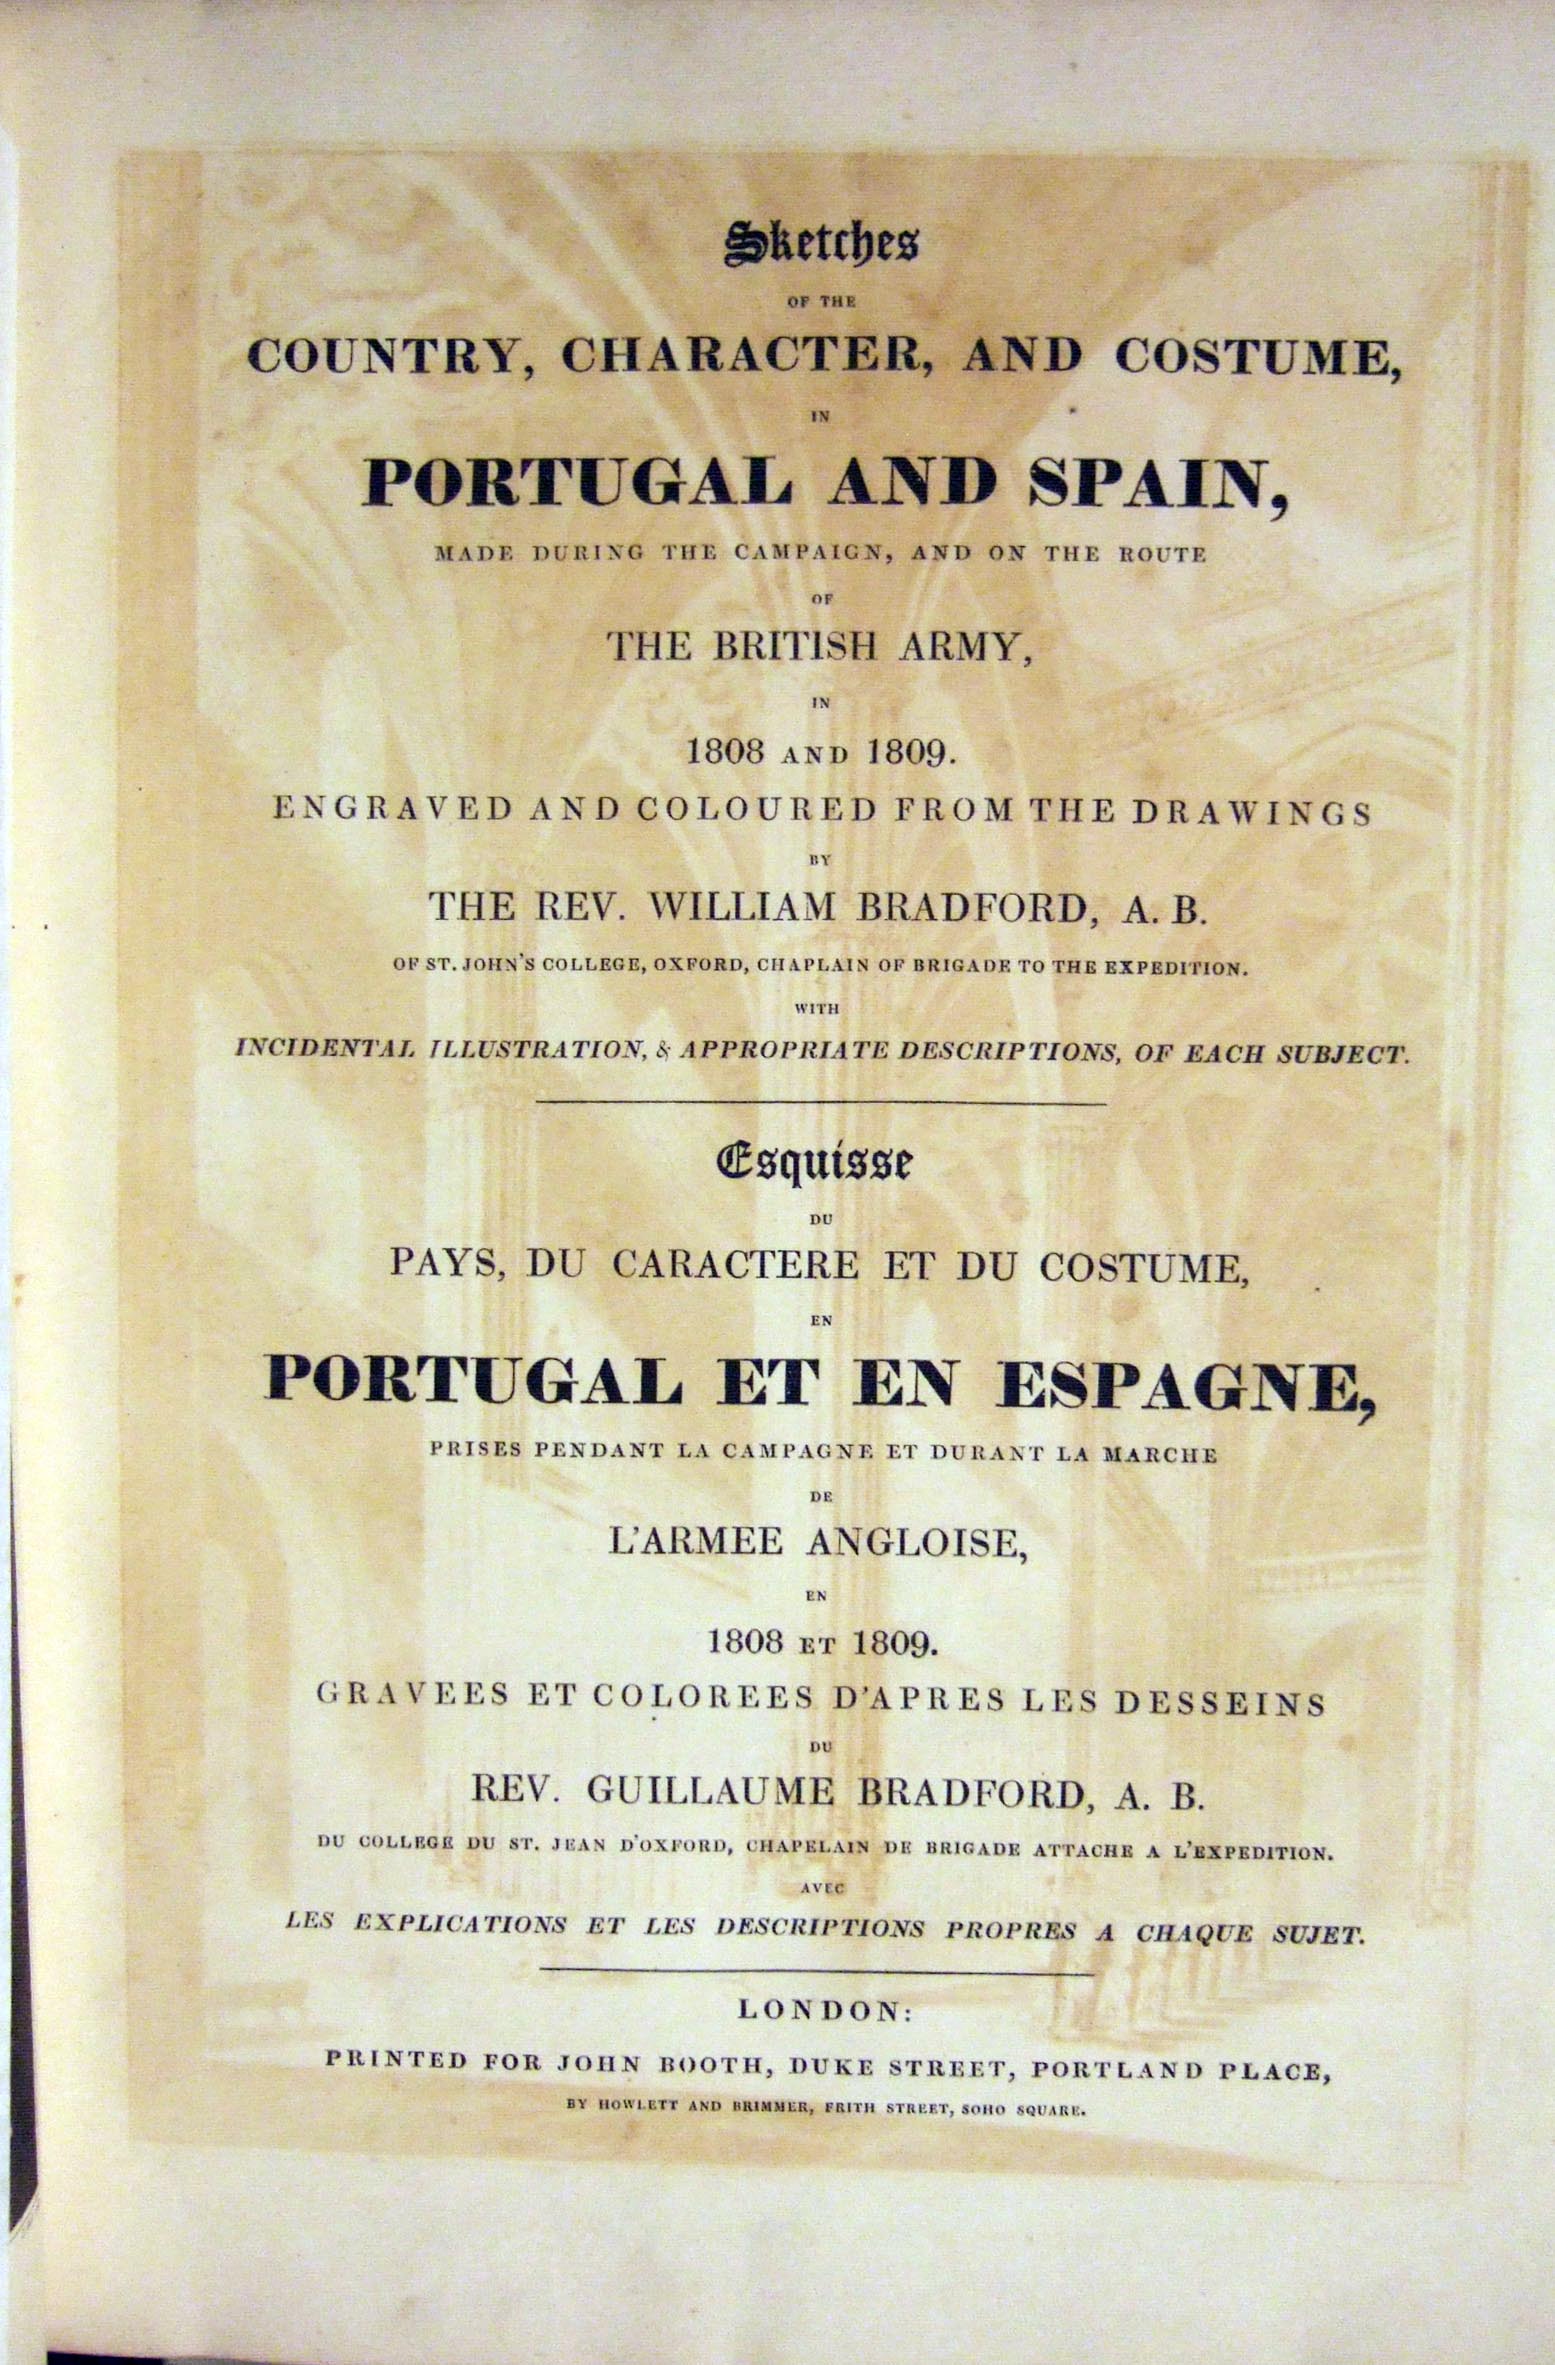 RBSC,William Bradford,, Sketches of... Portugal and Spain, London 1809